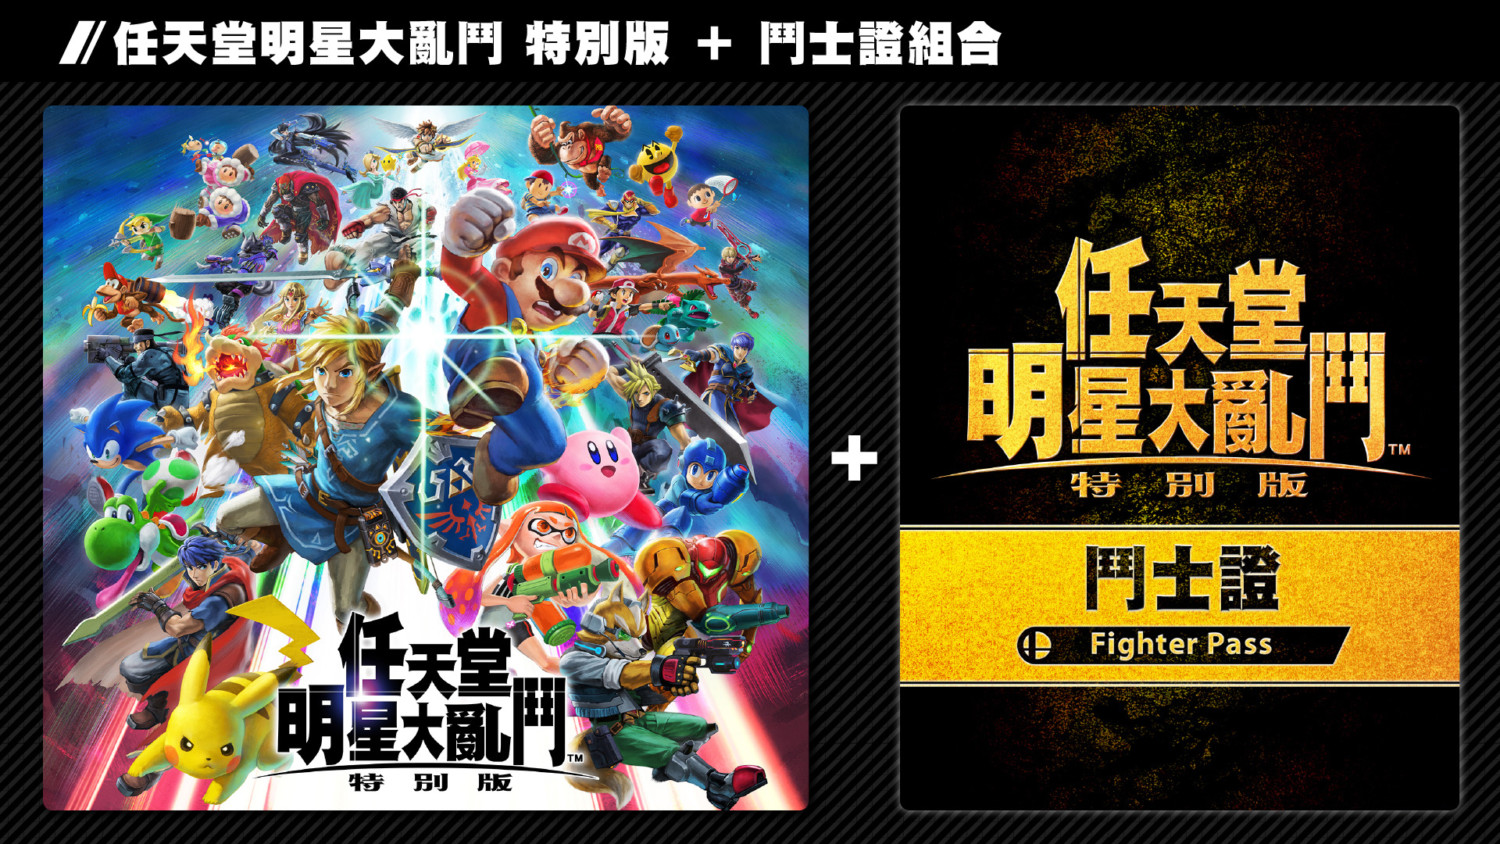 Kong South Bros. Korea NintendoSoup And – Smash For And Super Confirmed Bundle Hong Pass Fighters Ultimate